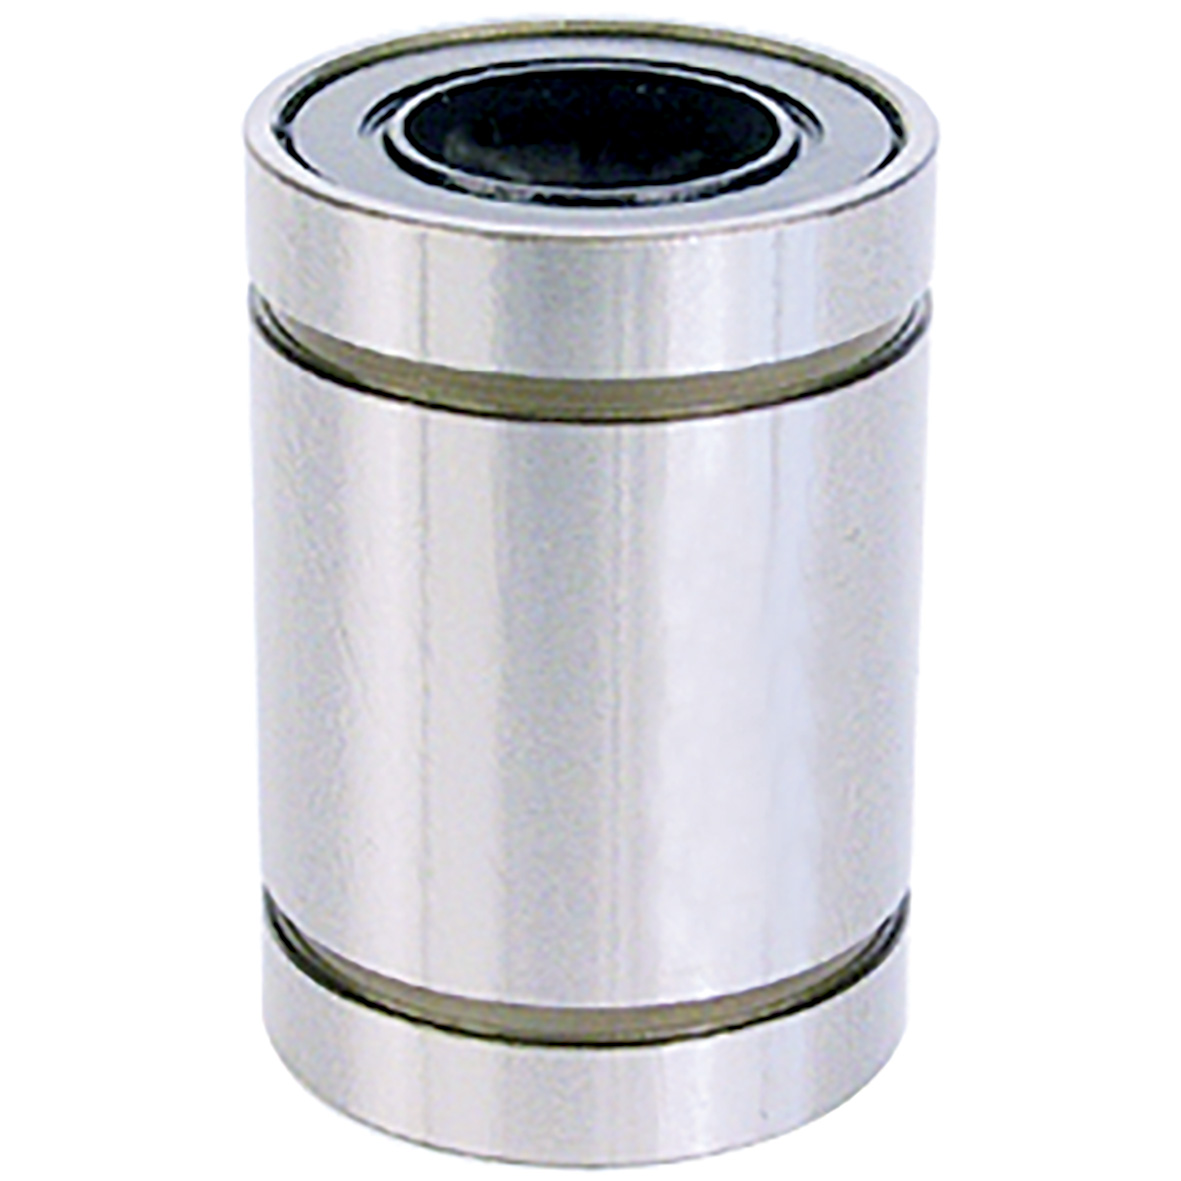 Closed linear precision bearing - Precision - steel - Closed - Steel / Polyamid